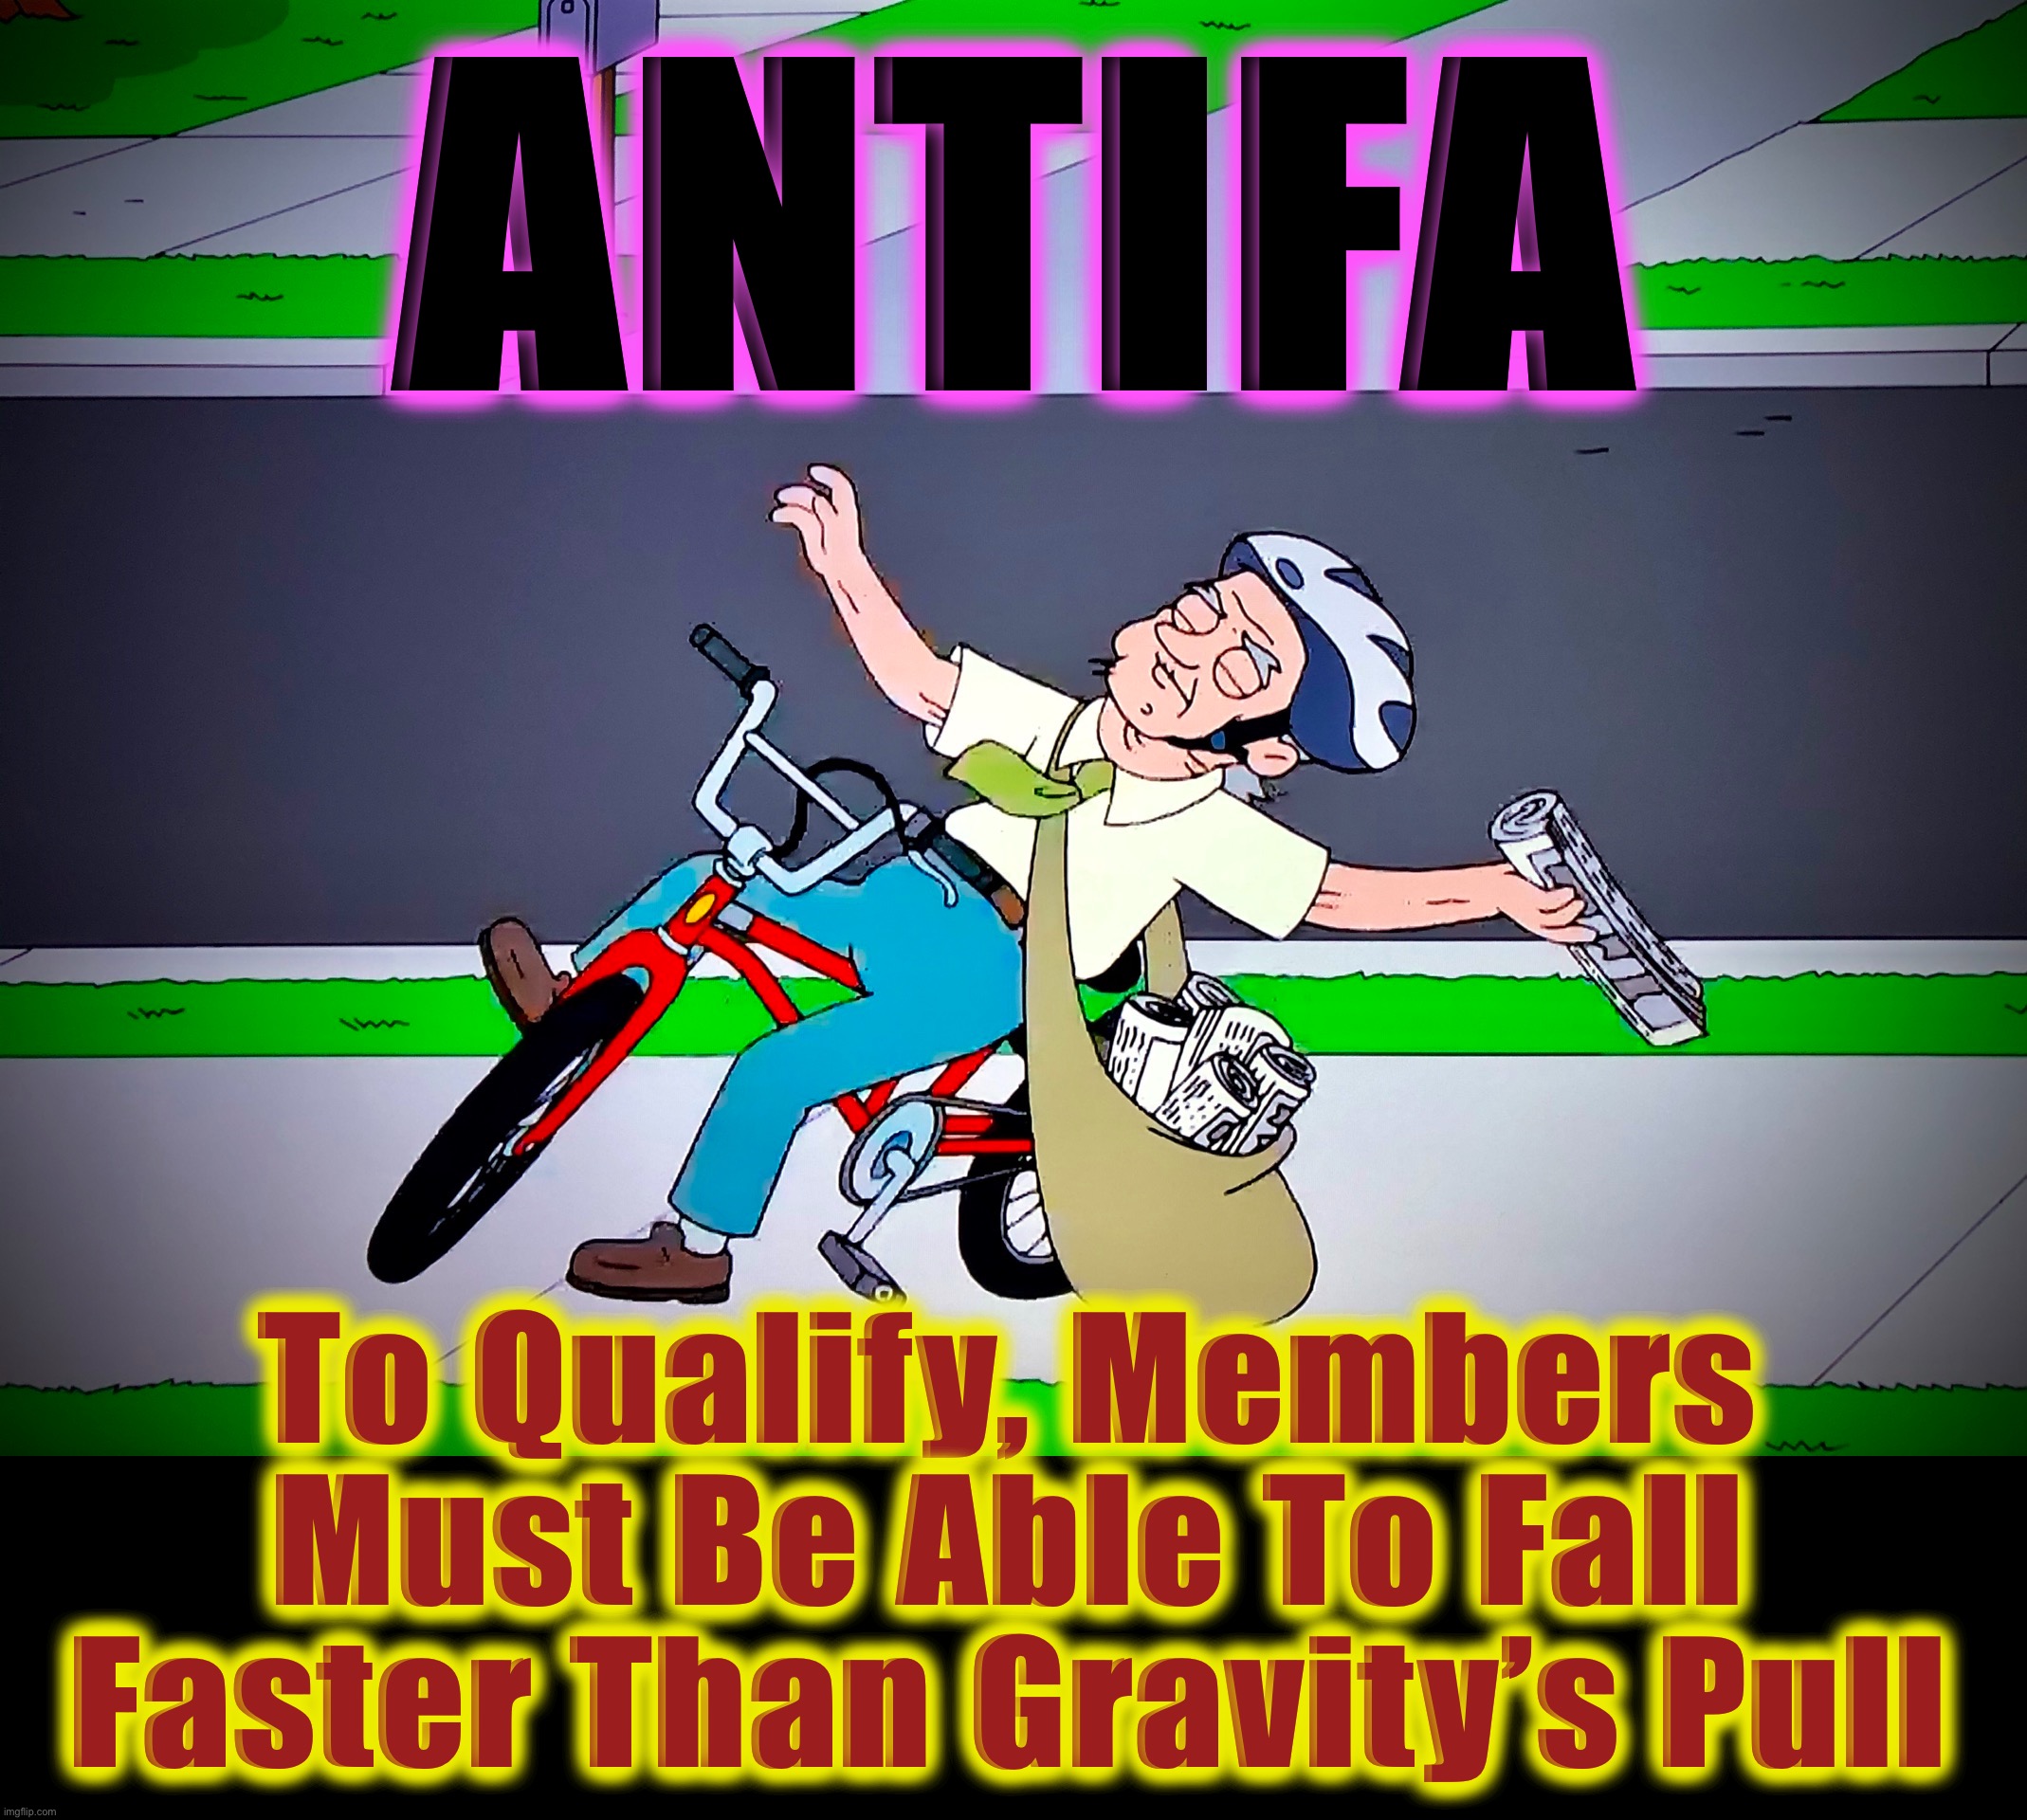 Trump is on(to) something | ANTIFA; To Qualify, Members Must Be Able To Fall Faster Than Gravity’s Pull | image tagged in antifa,memes,2020,conspiracy theory,captain trumps,police brutality | made w/ Imgflip meme maker